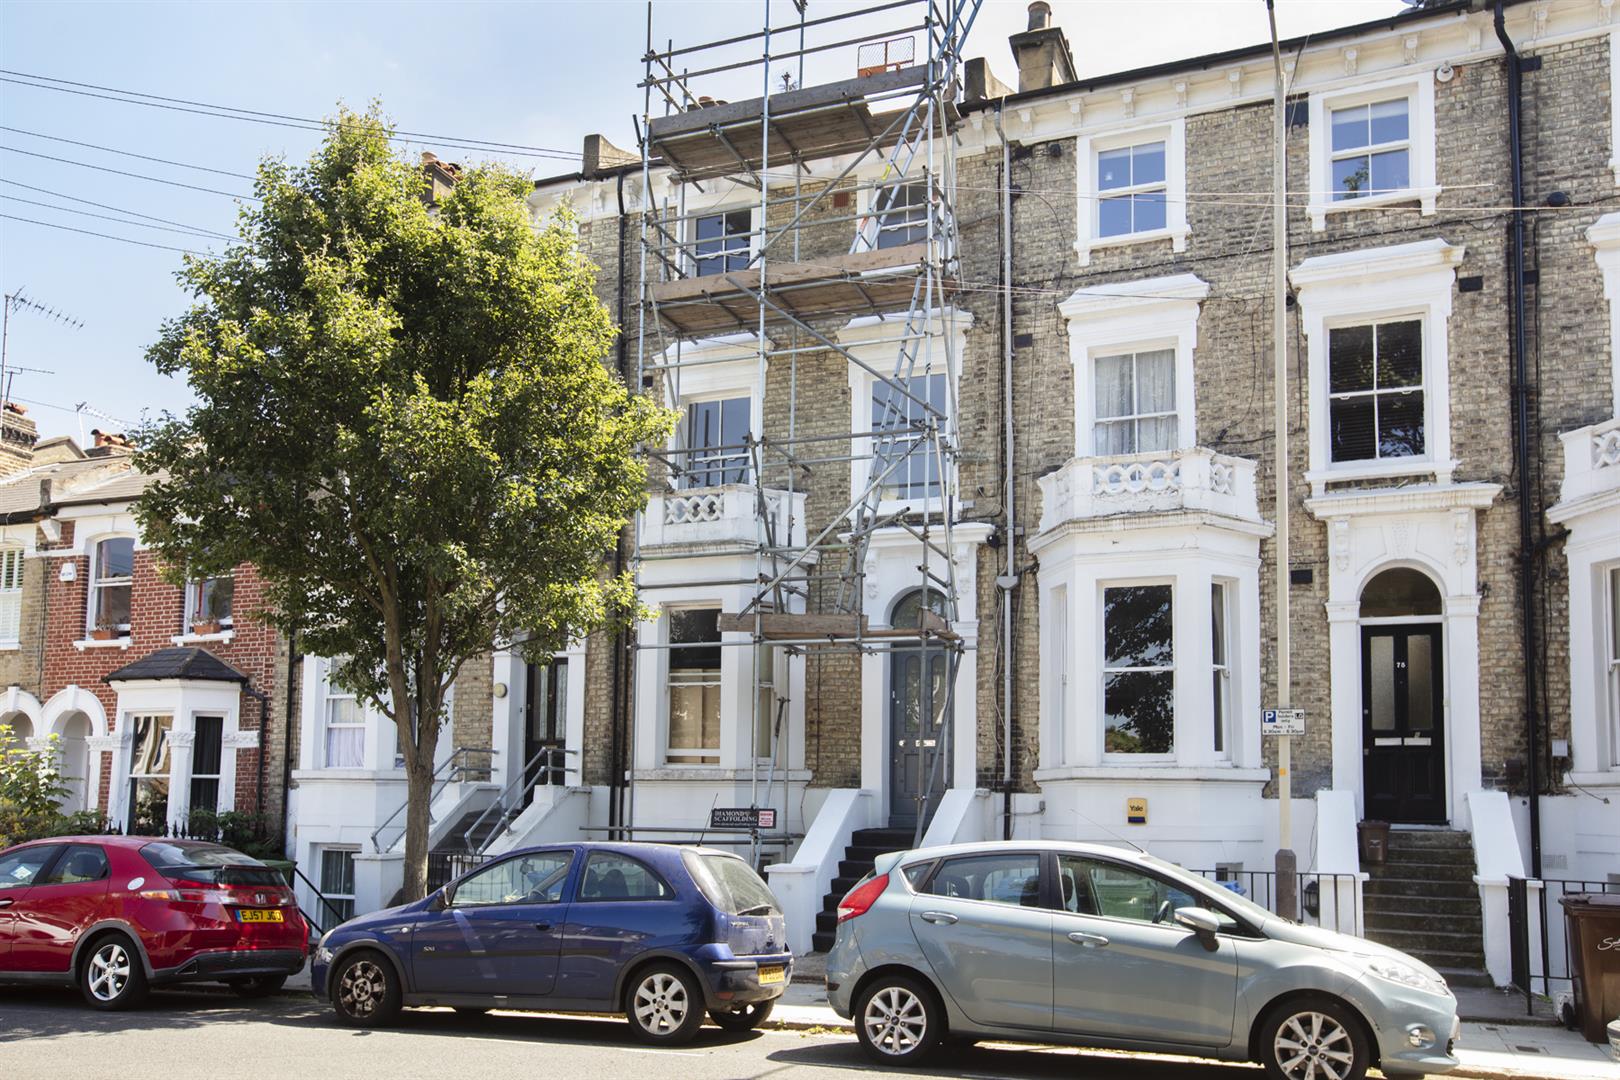 Flat - Conversion For Sale in Graces Road, Camberwell, SE5 963 view6